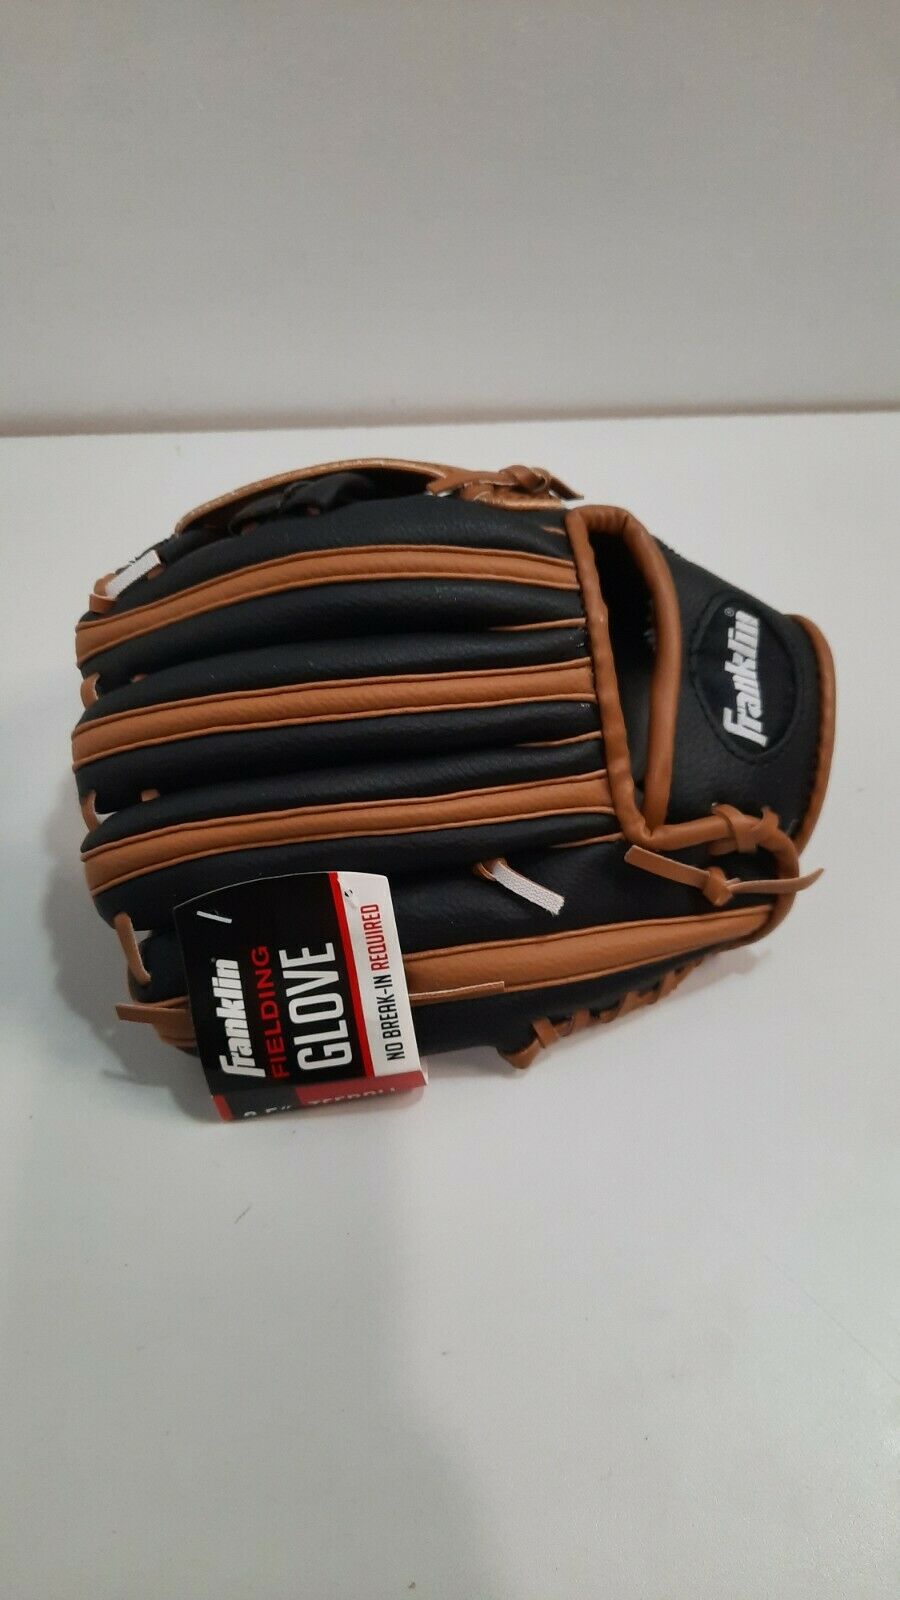 Franklin Baseball Mitt ready to play fielding glove size 9.5 In left hand right hand throwing NEW